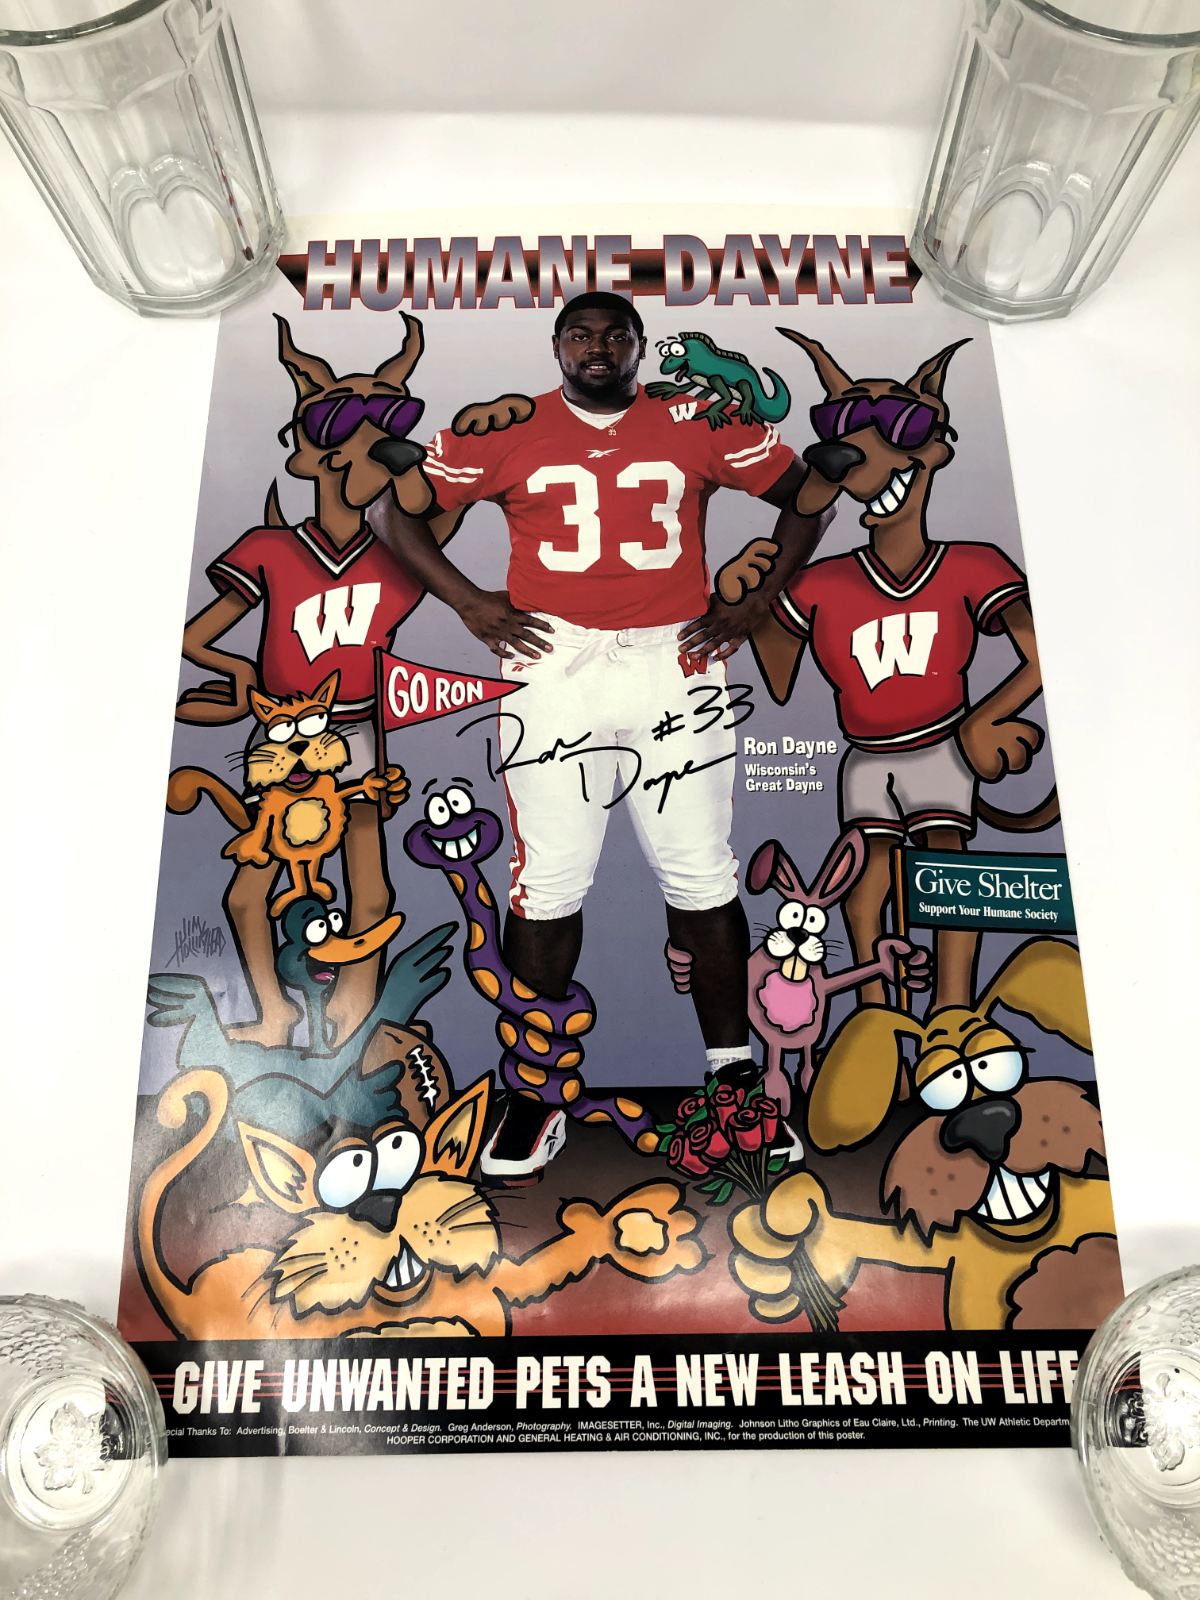 Wisconsin Badgers #33 Ron Dayne Humane Dayne Poster 12" x 18" 1990's Authentic - $35.10